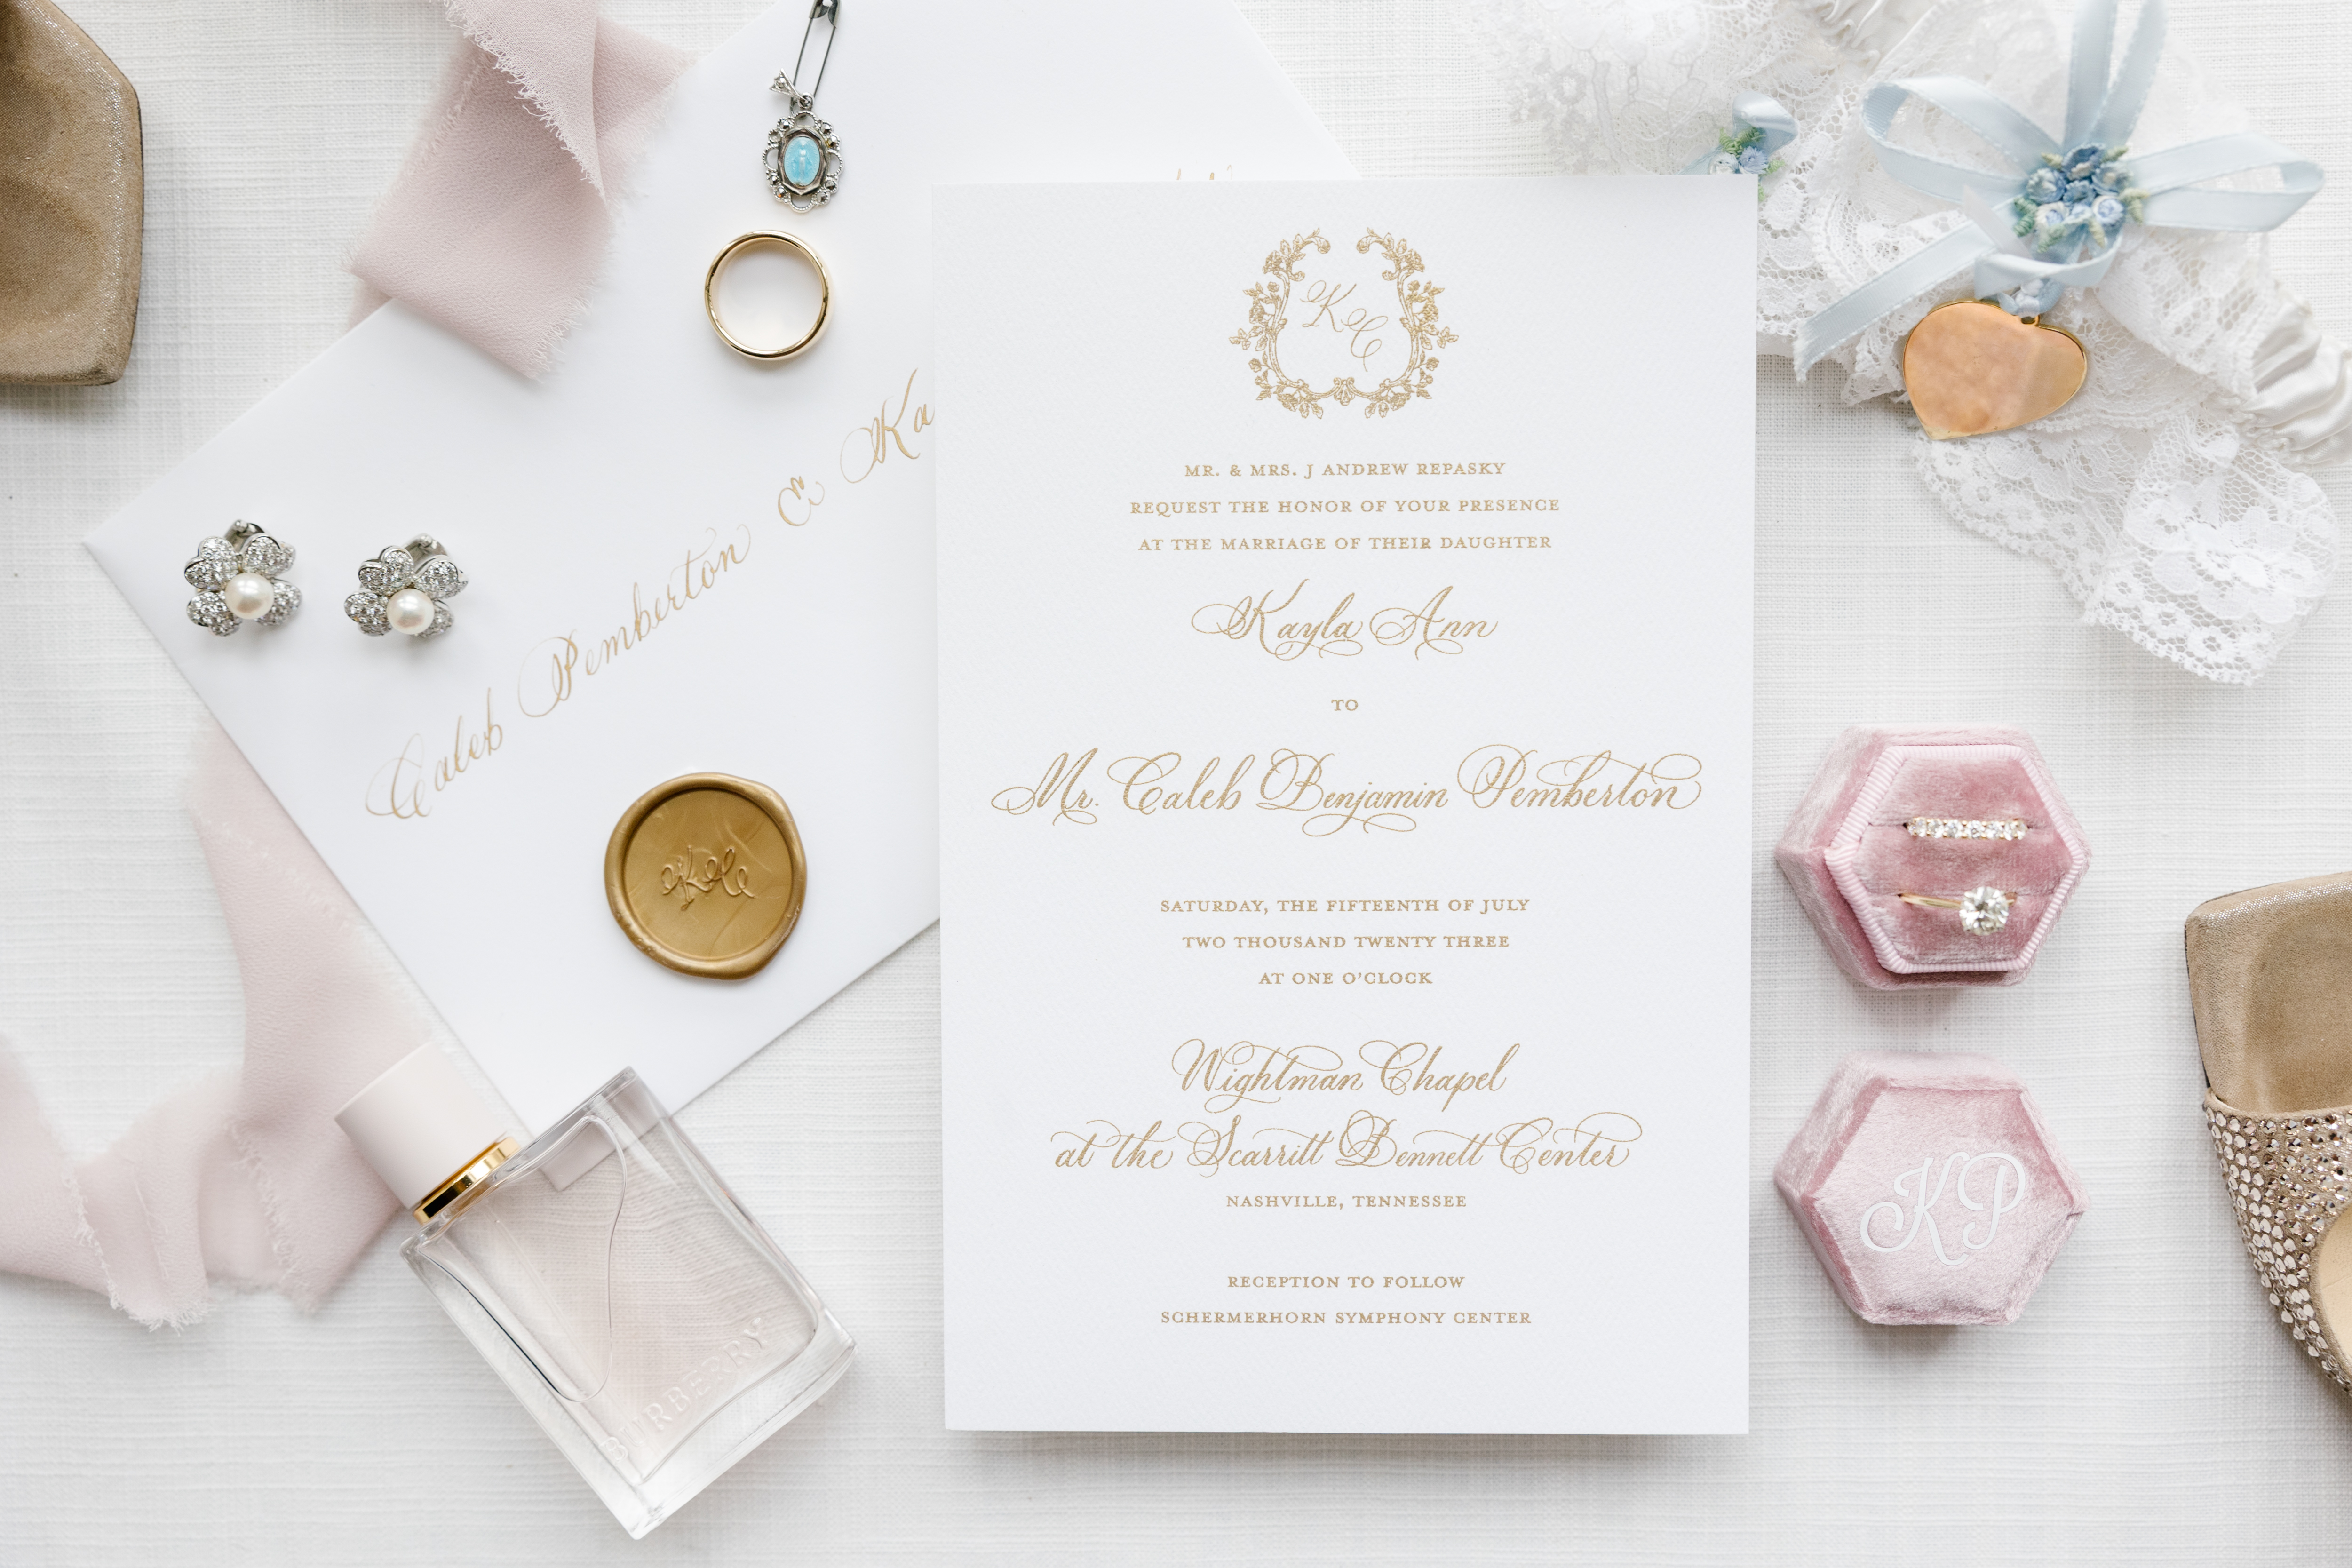 Wedding invitation suite styled along with jewelry, perfume, garter and other fabrics.